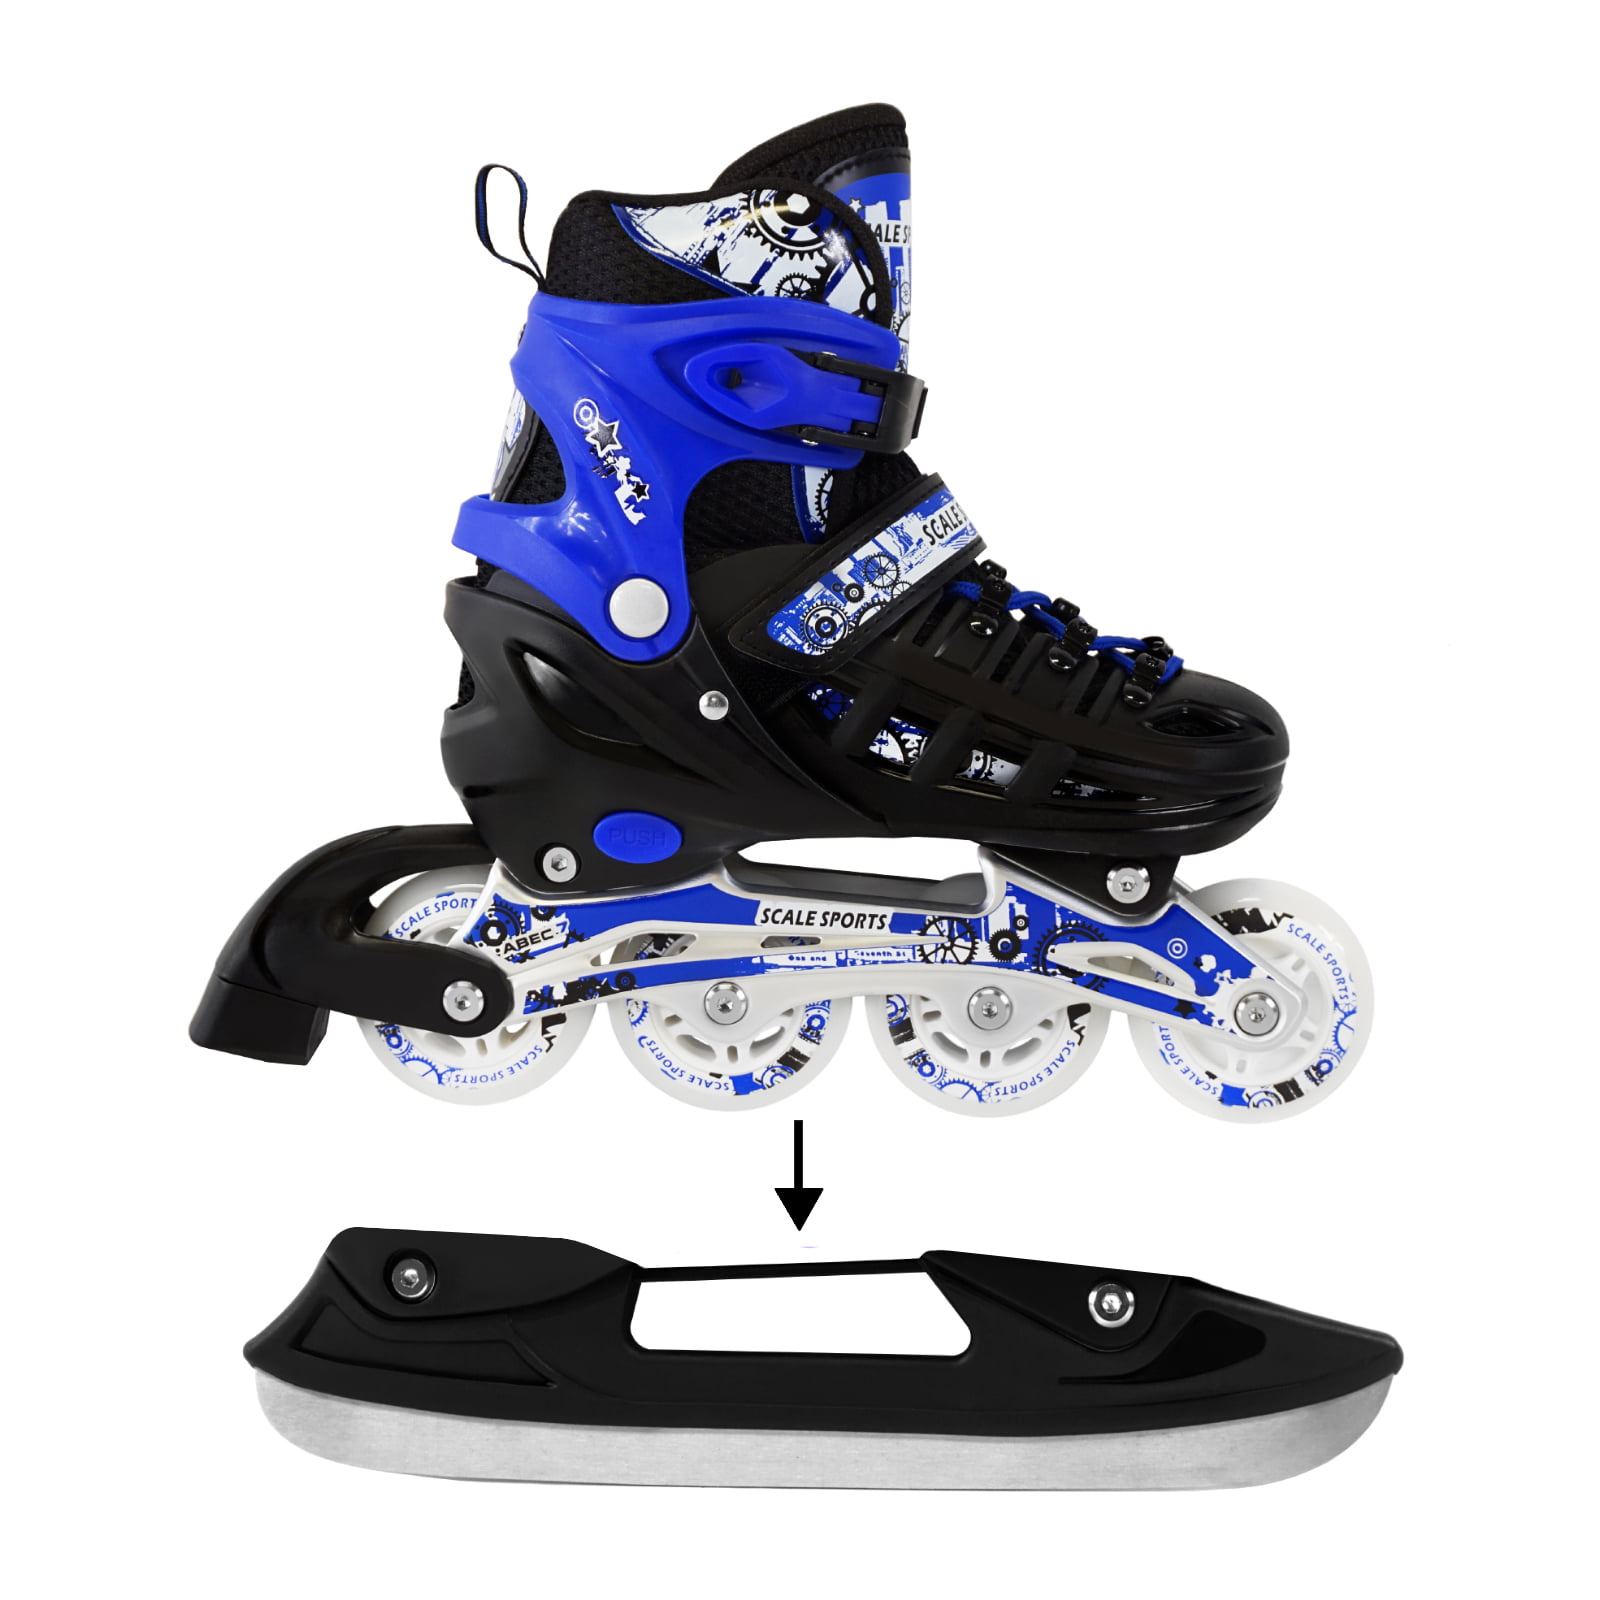 Adjustable Inline Skates Ice Skates Combo Pack Gift Boxed for Kids Size from 13.5 Junior to 9 Adult 